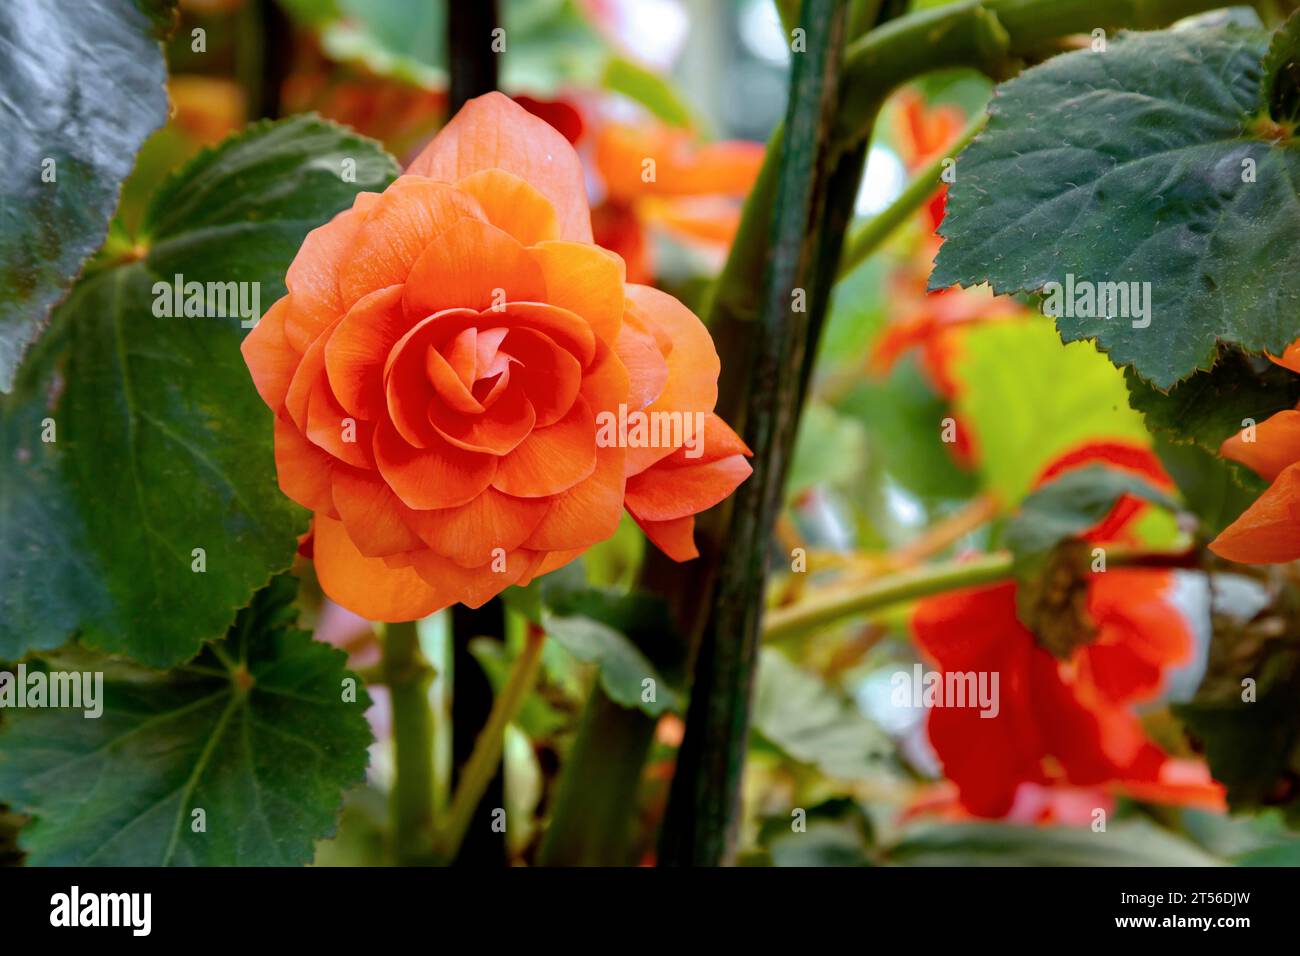 Orange begonia in full bloom at the Road Company garden Mussourie, Uttarakhand Stock Photo